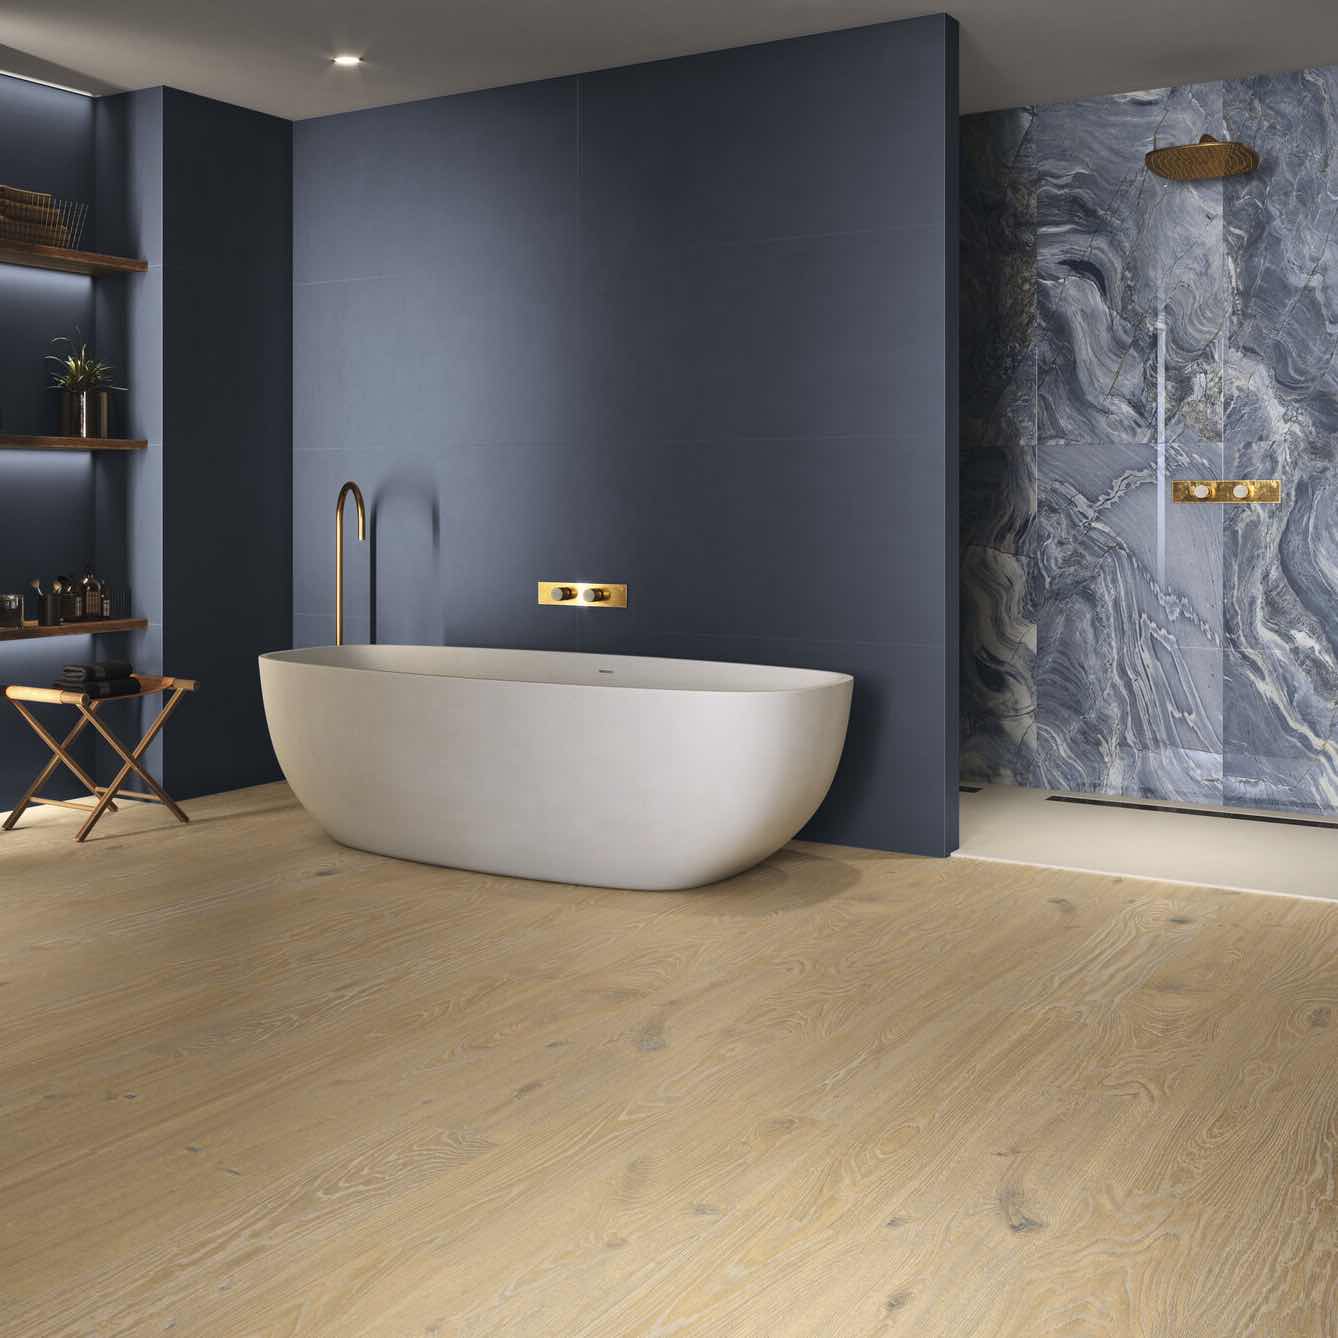 8 Great Ways To Use Wood Effect Tiles On Your Walls – Porcelain